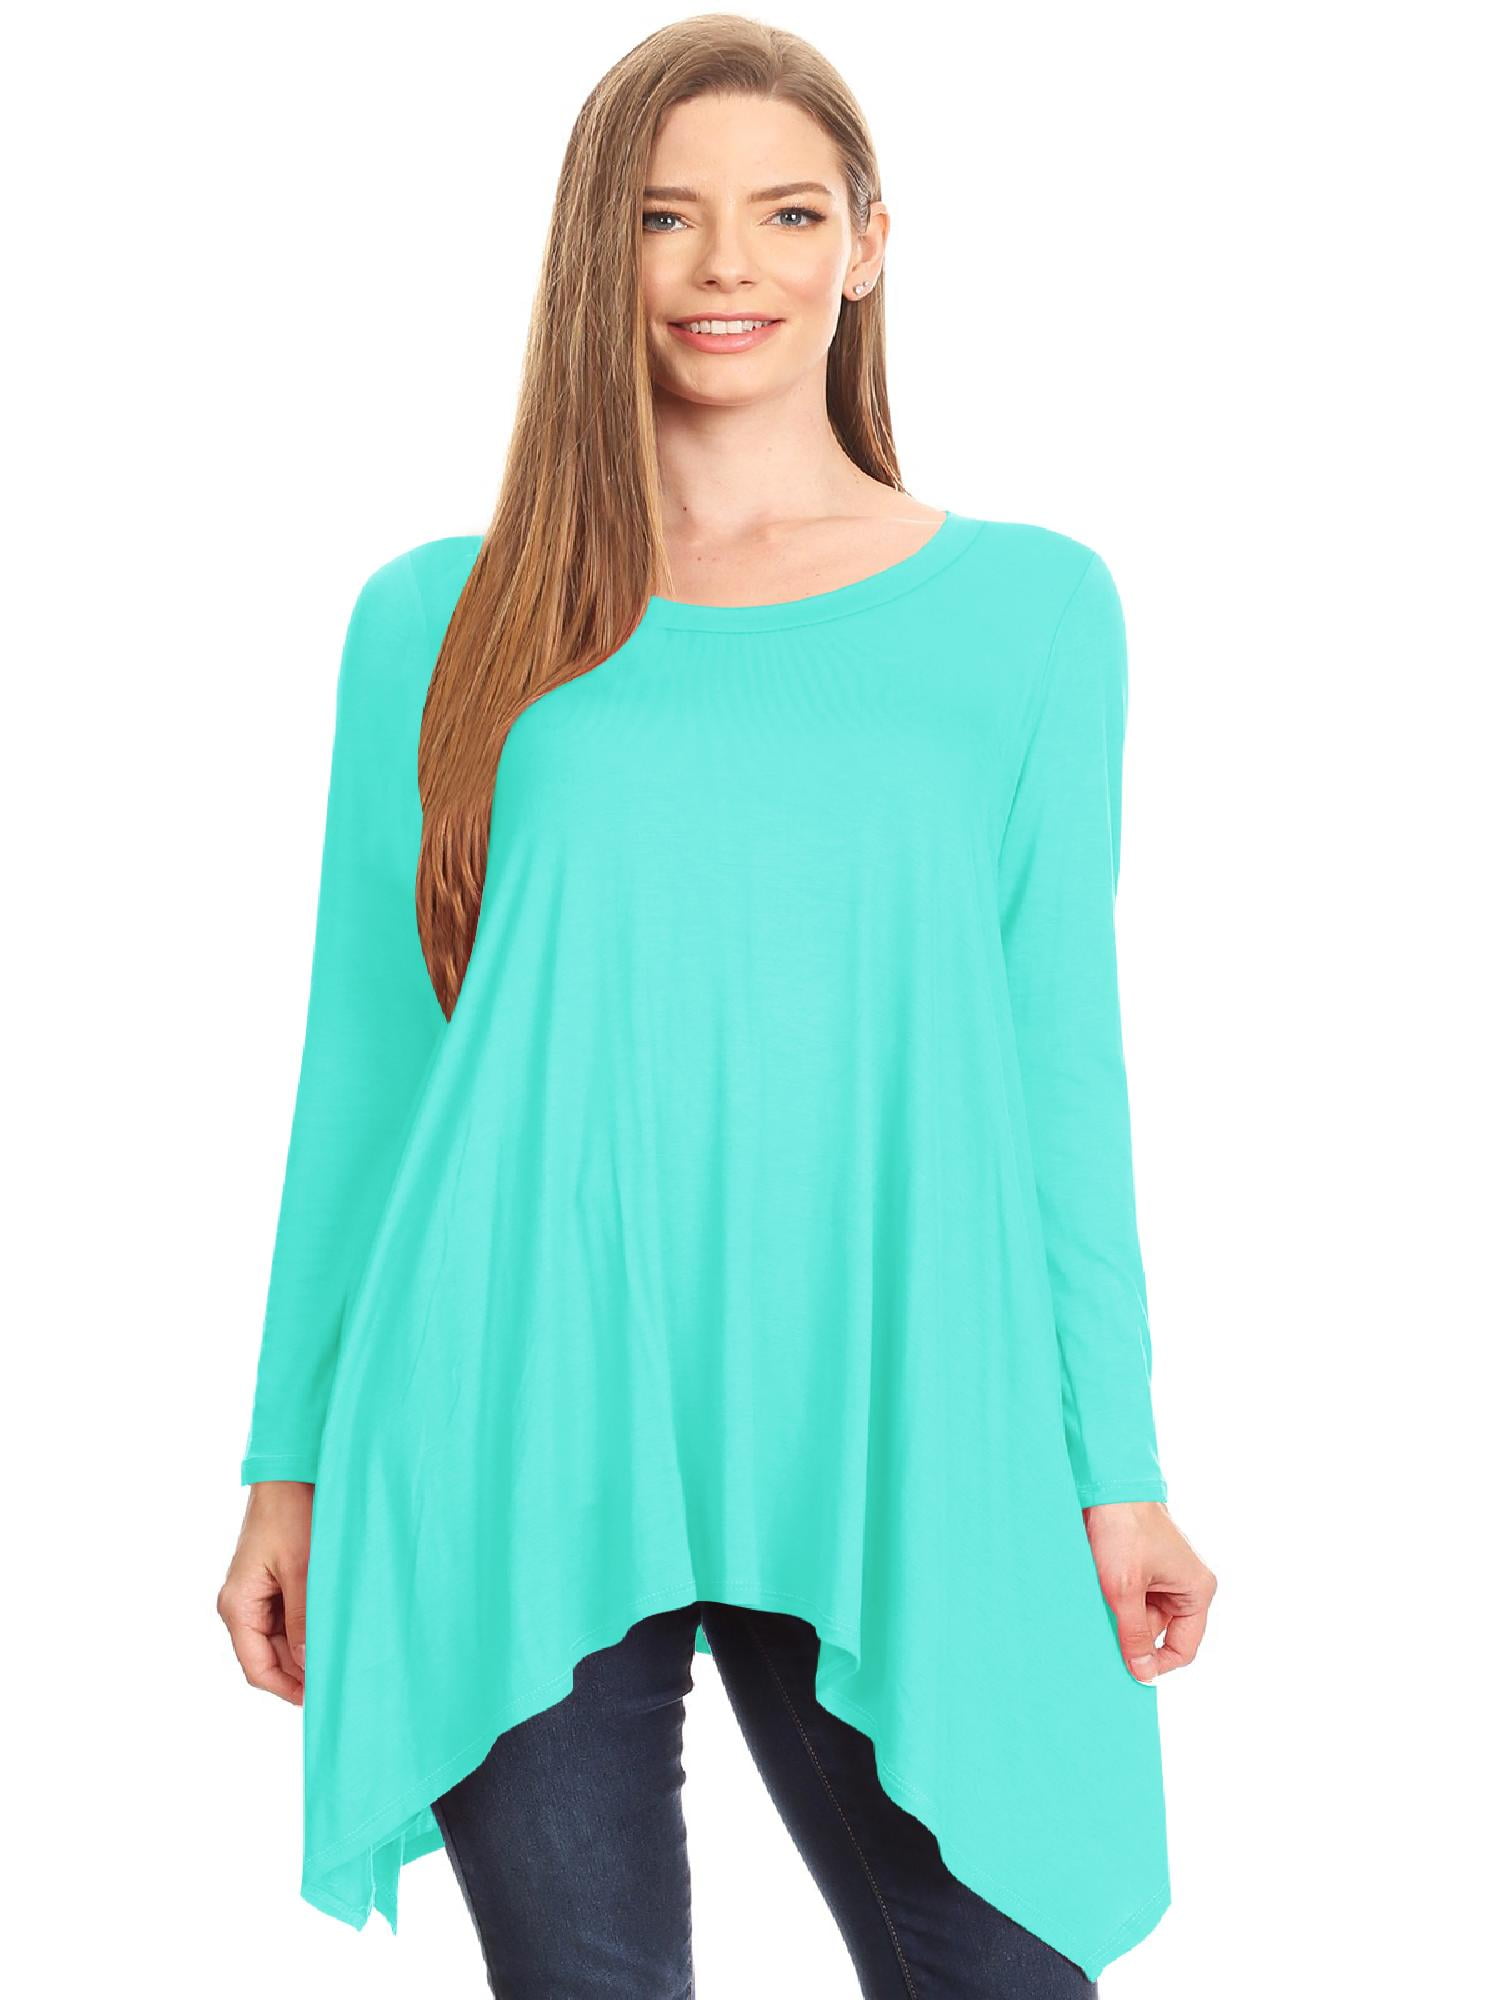 Moa Collection - Women's Solid Casual Basic Long Sleeves Asymmetric Hem ...